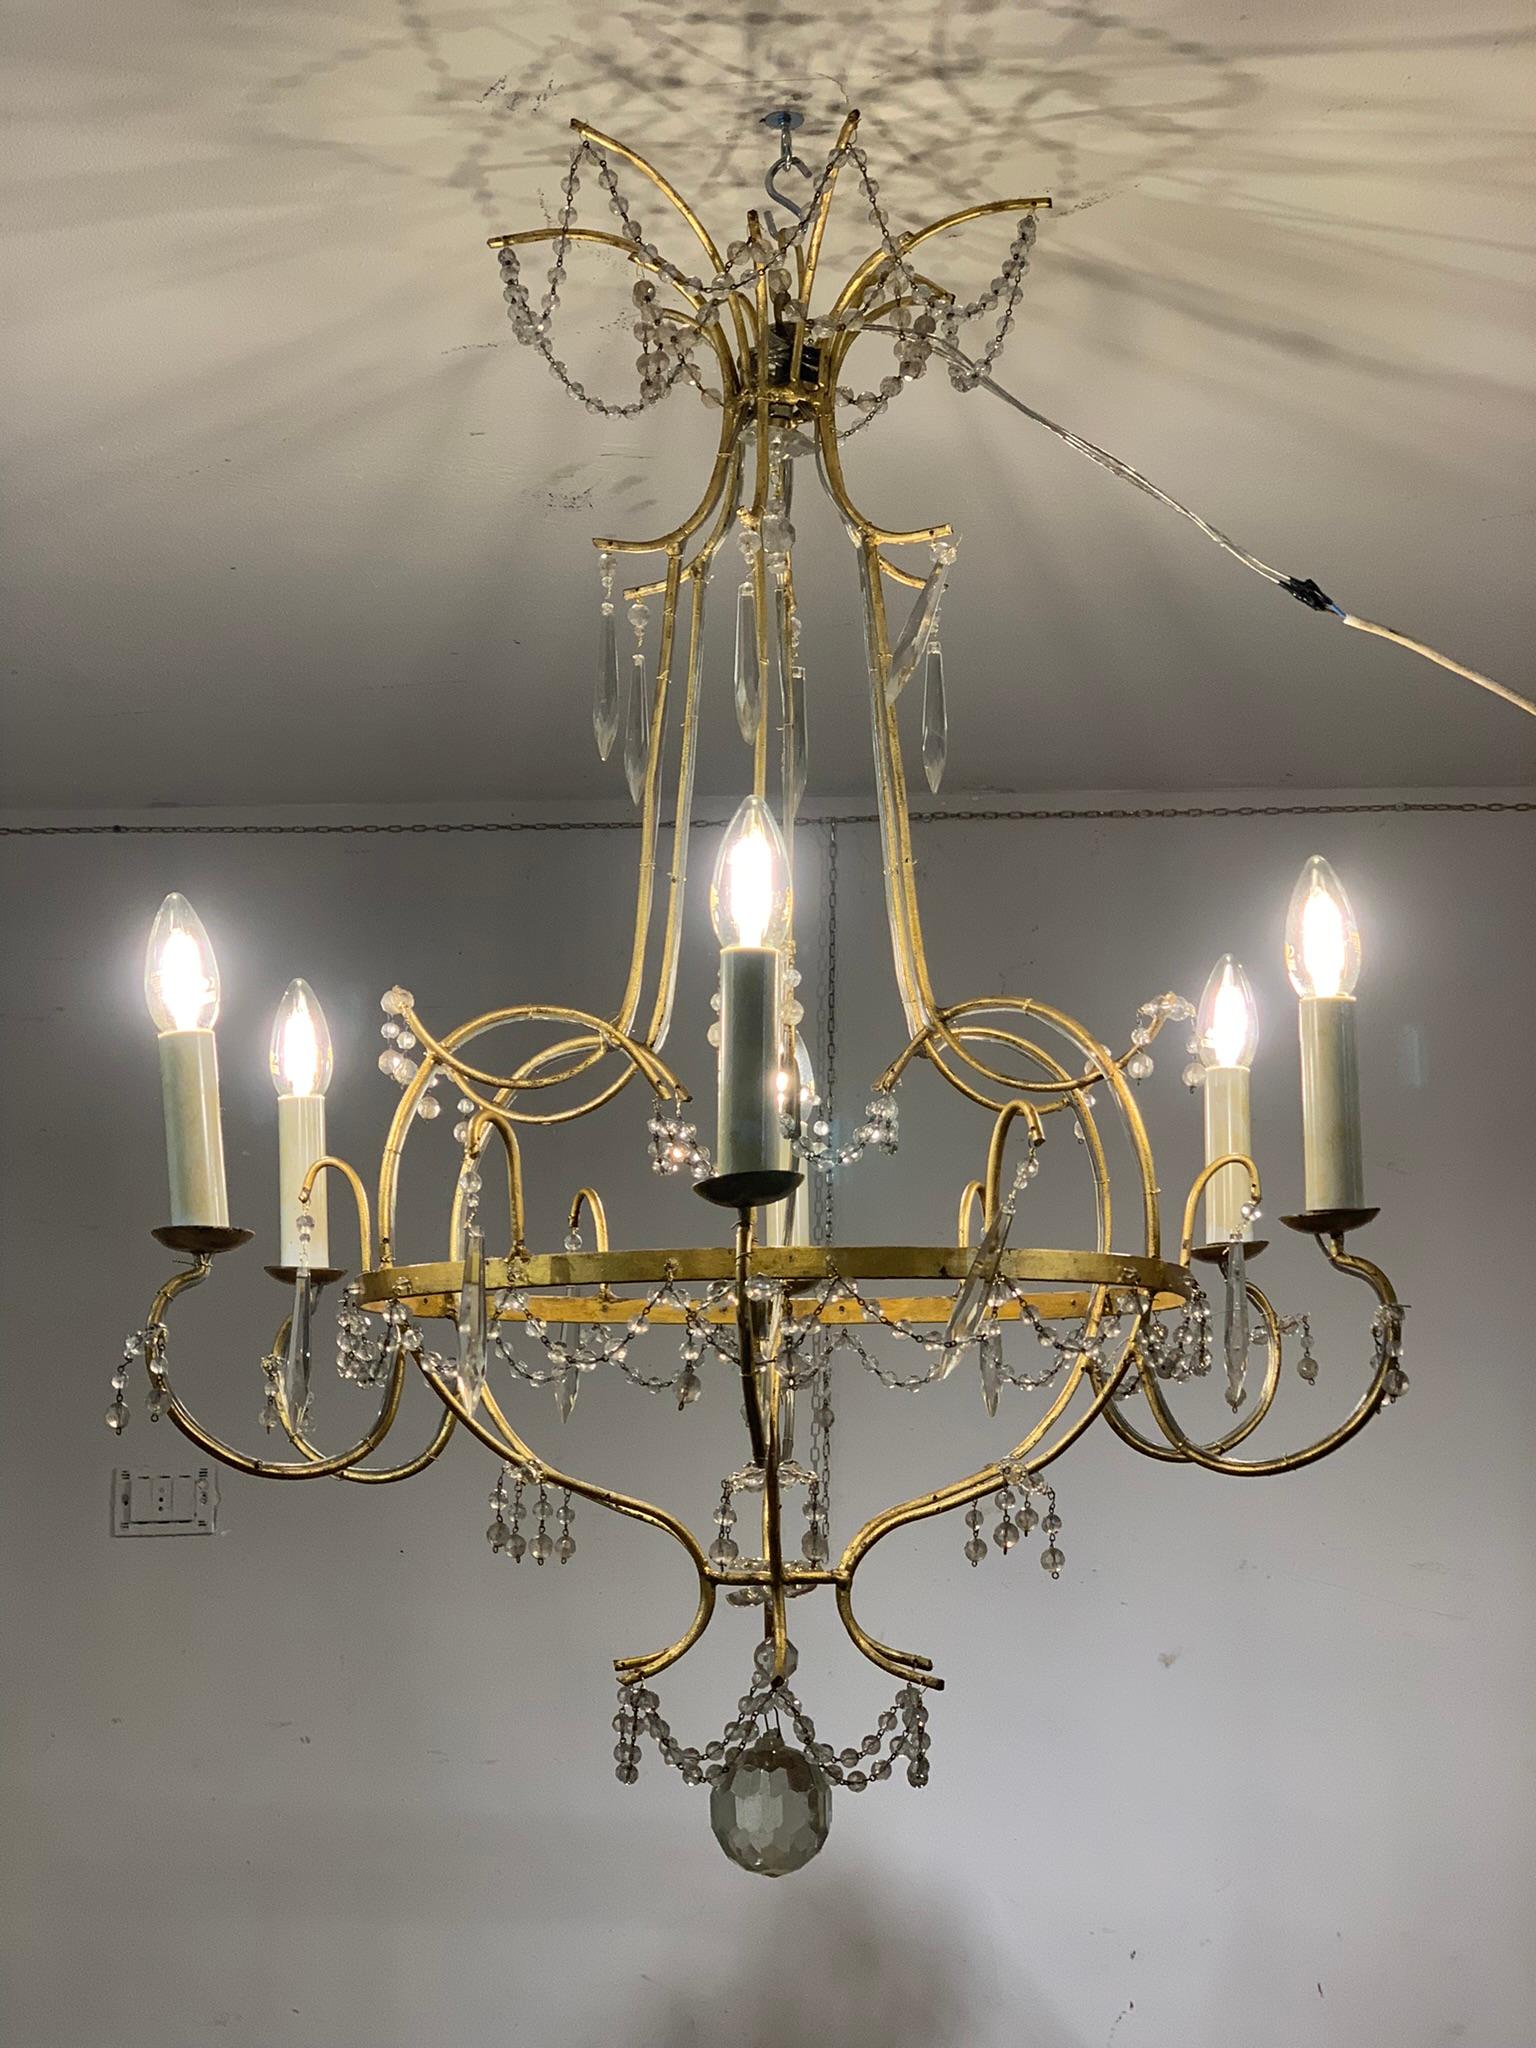 Gilt Mid-18th Century Iron and Crystal Chandelier